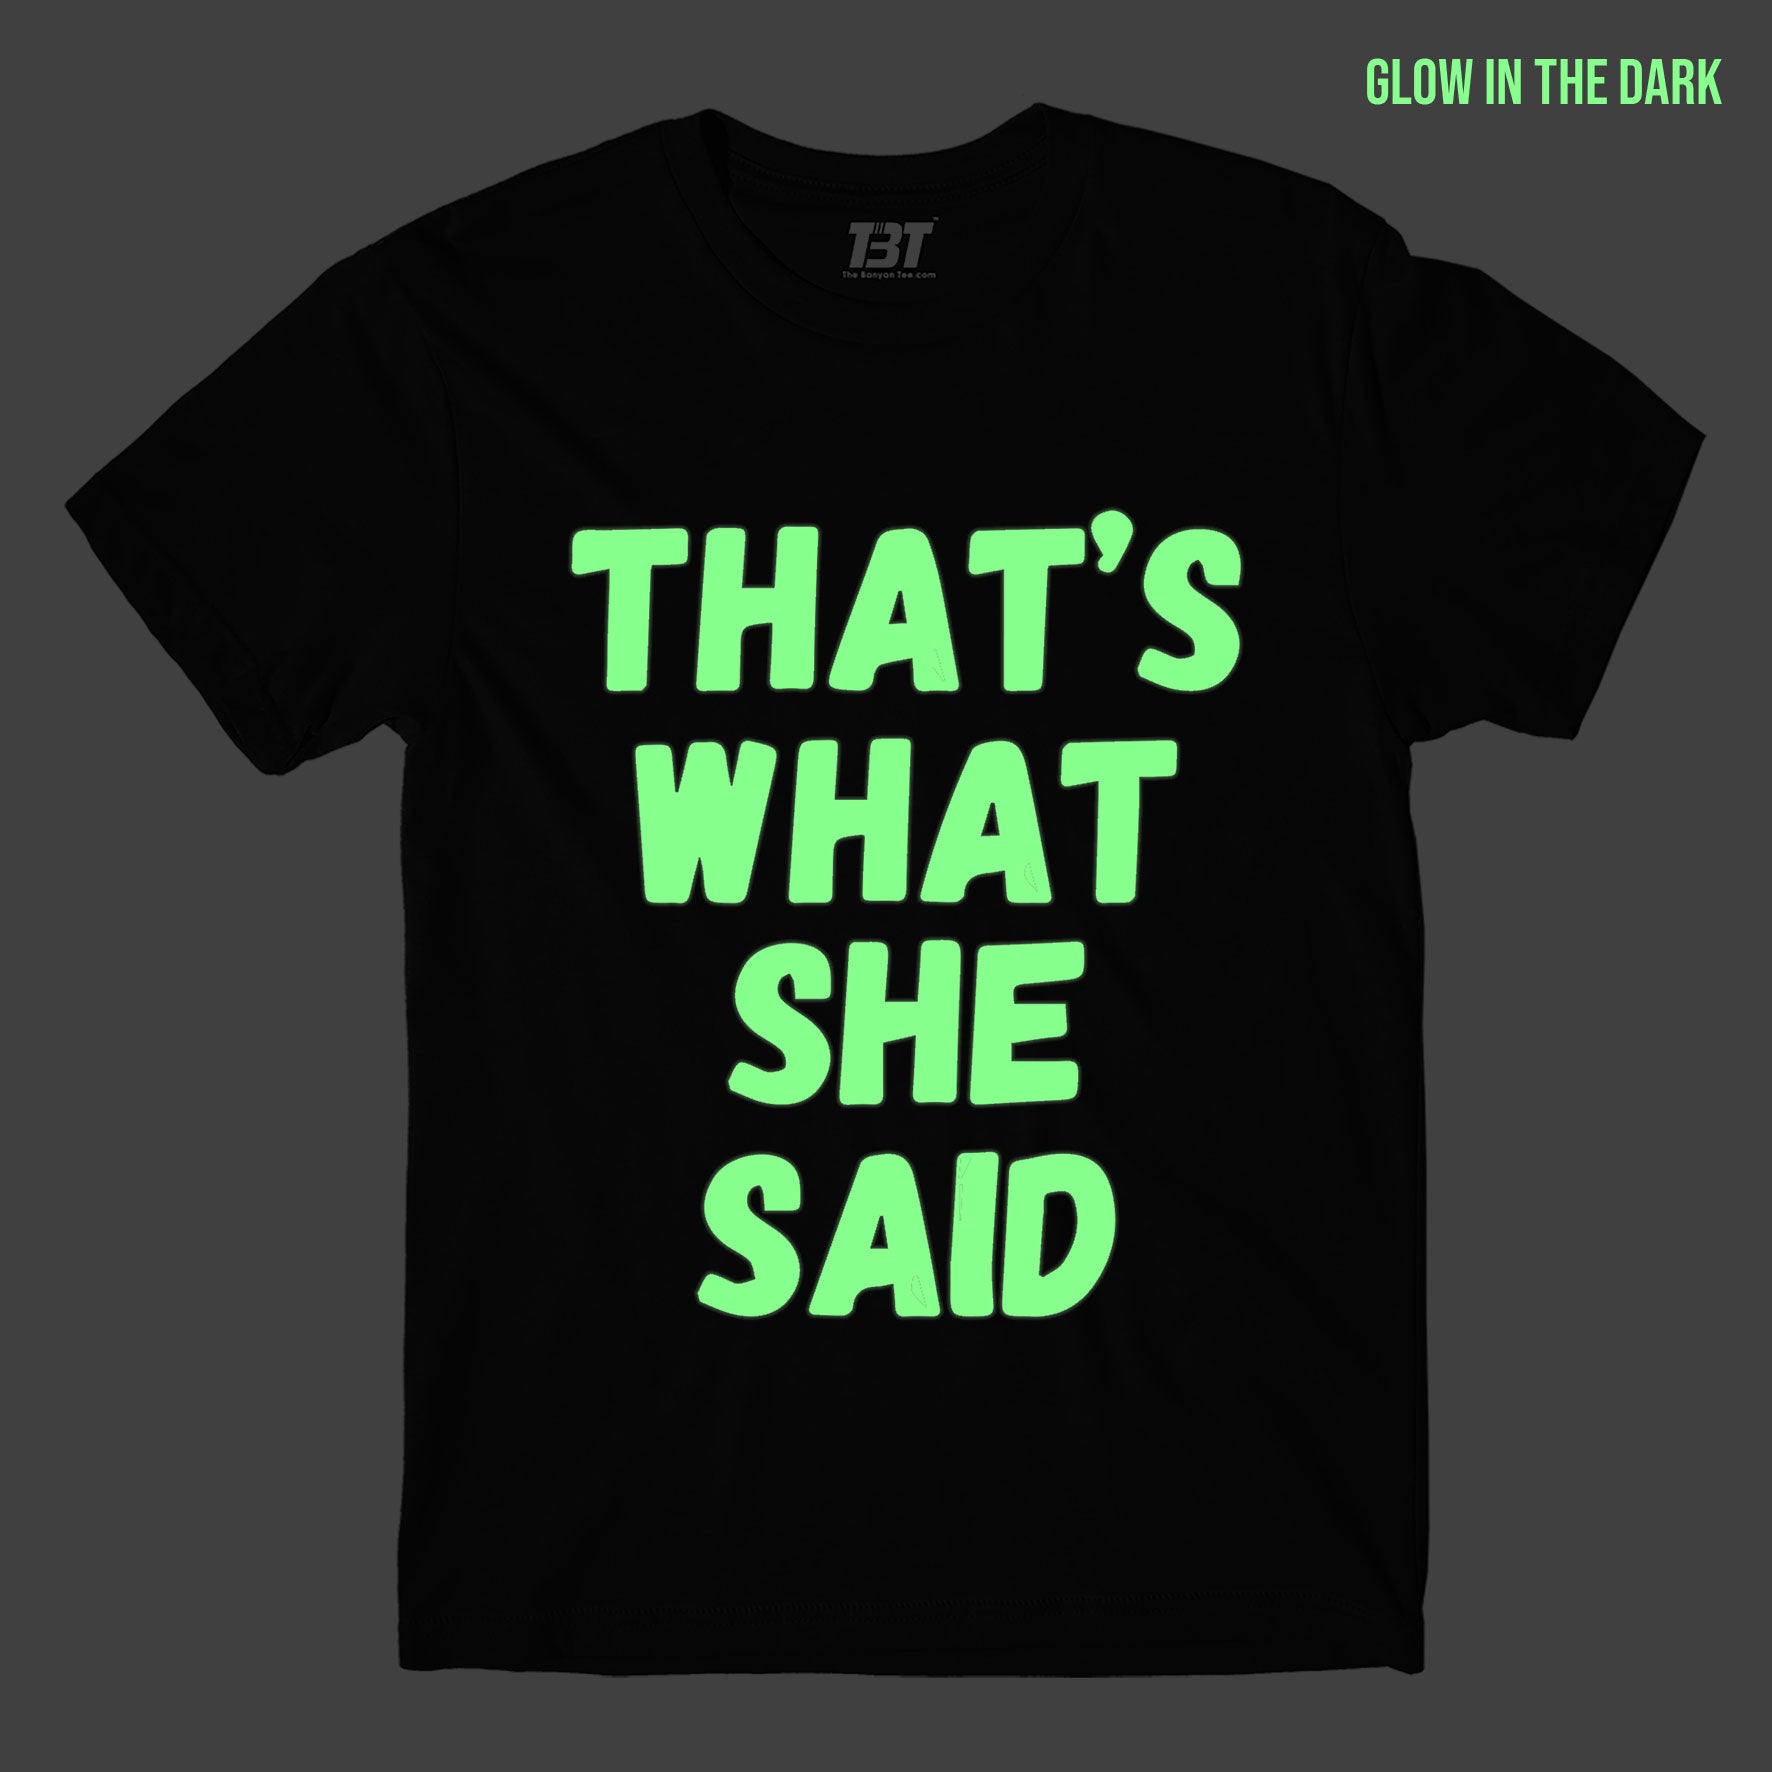 Glow In The Dark The Office T-shirt by The Banyan Tee